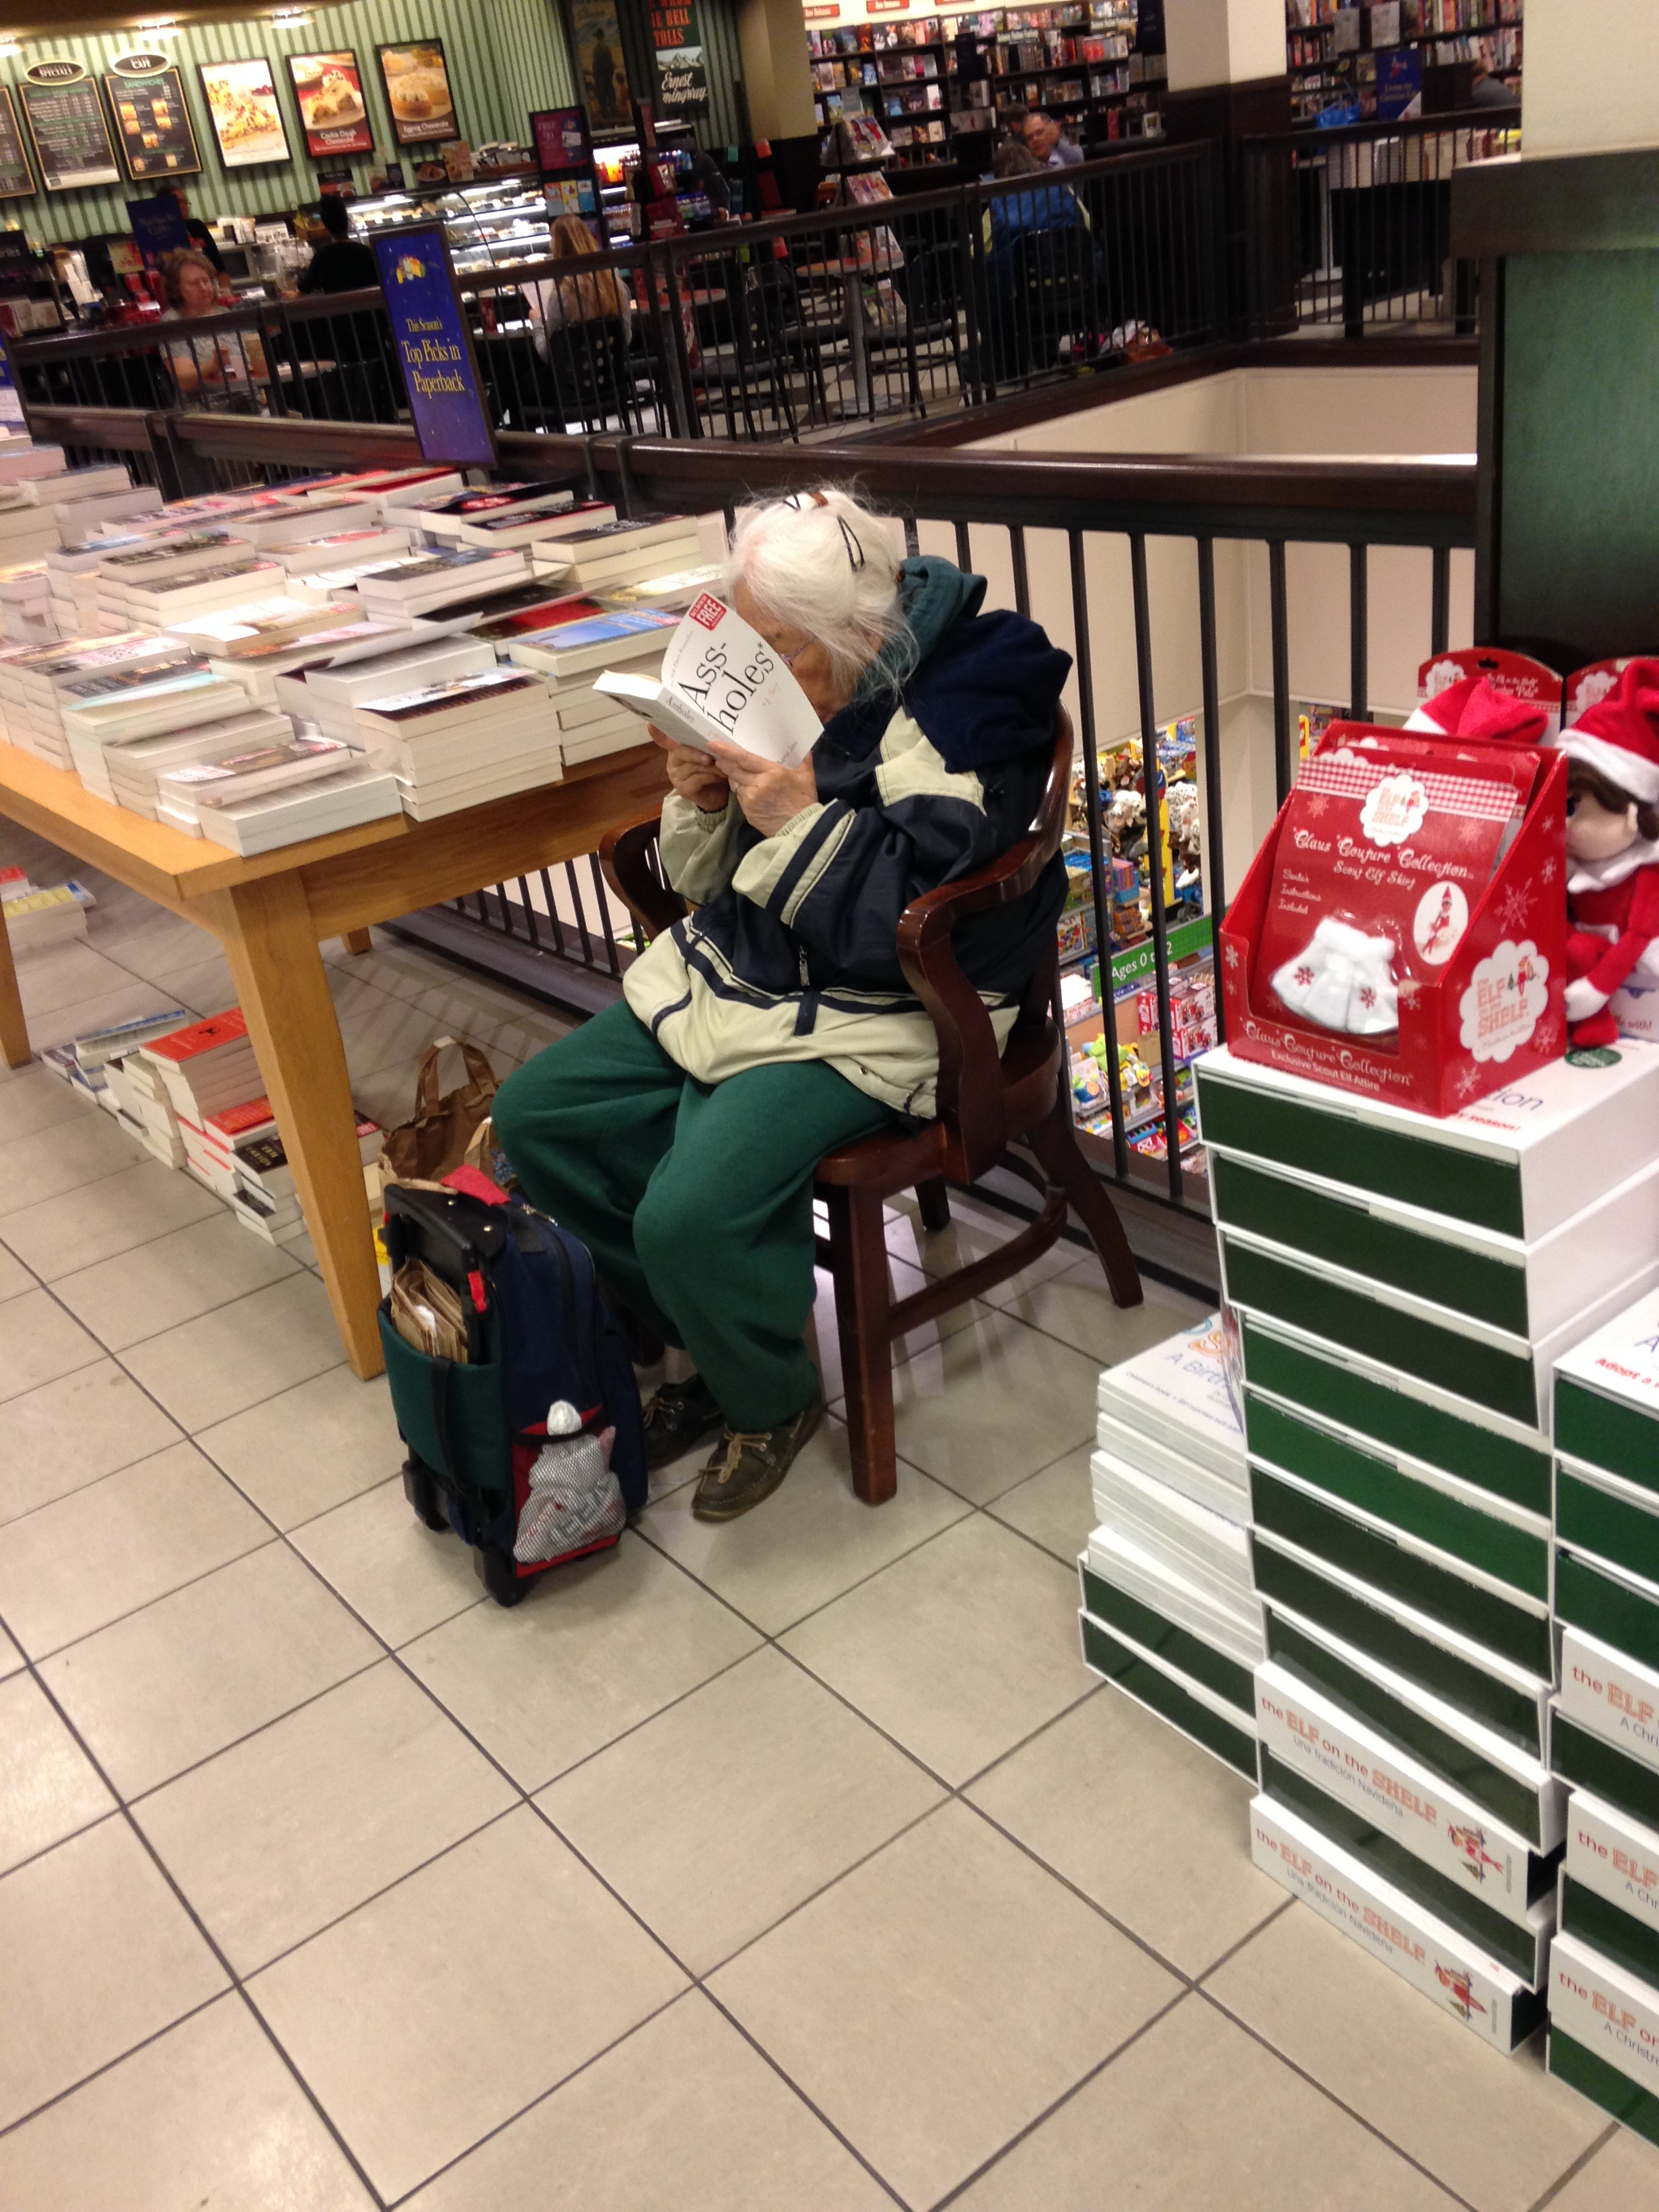 I saw this really old lady reading a book titled "Assholes" at the bookstore.